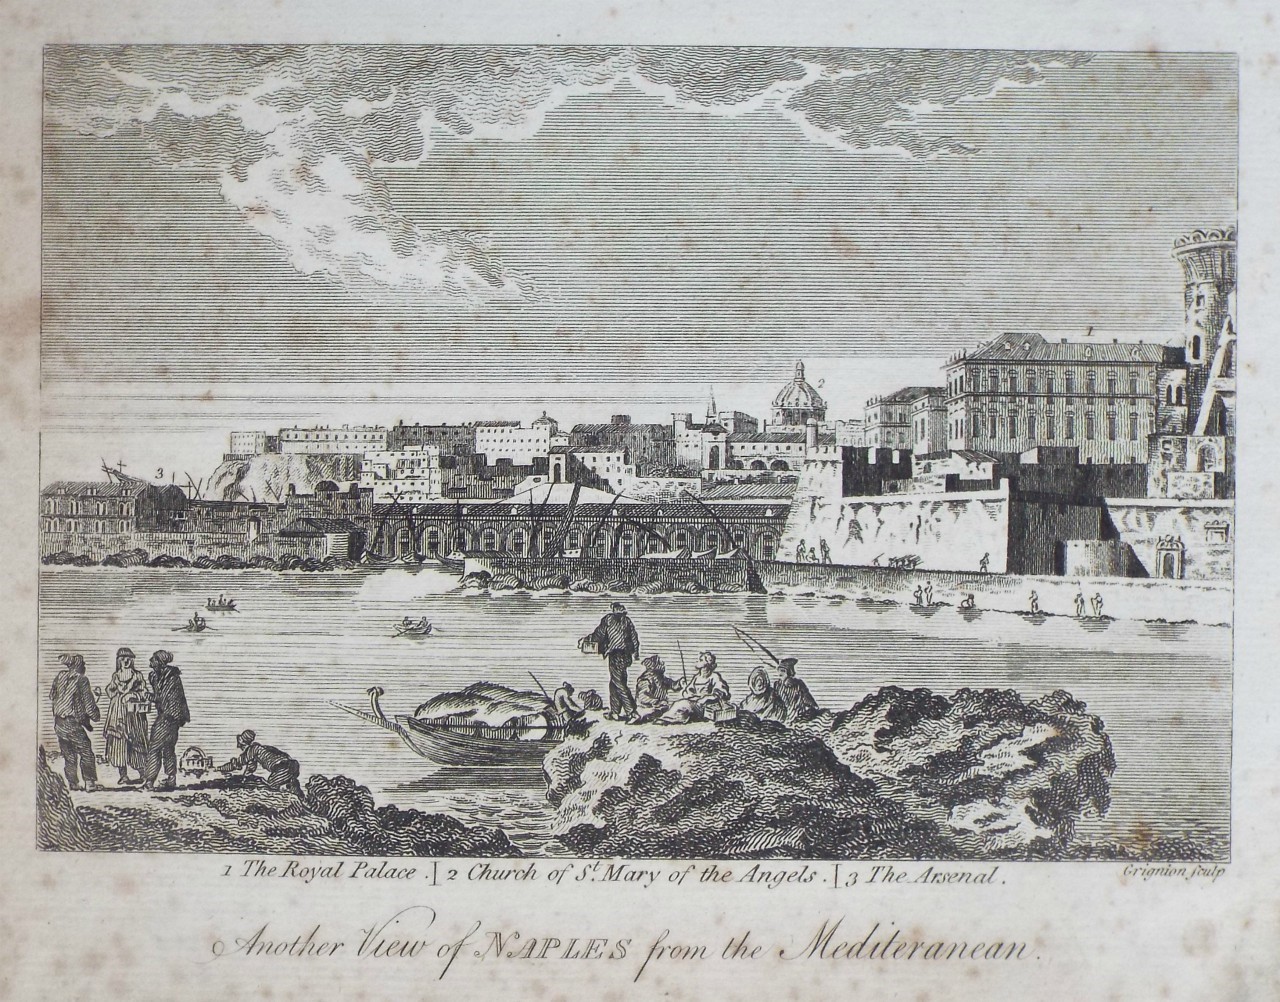 Print - Another View of Naples from the Mediterranean.